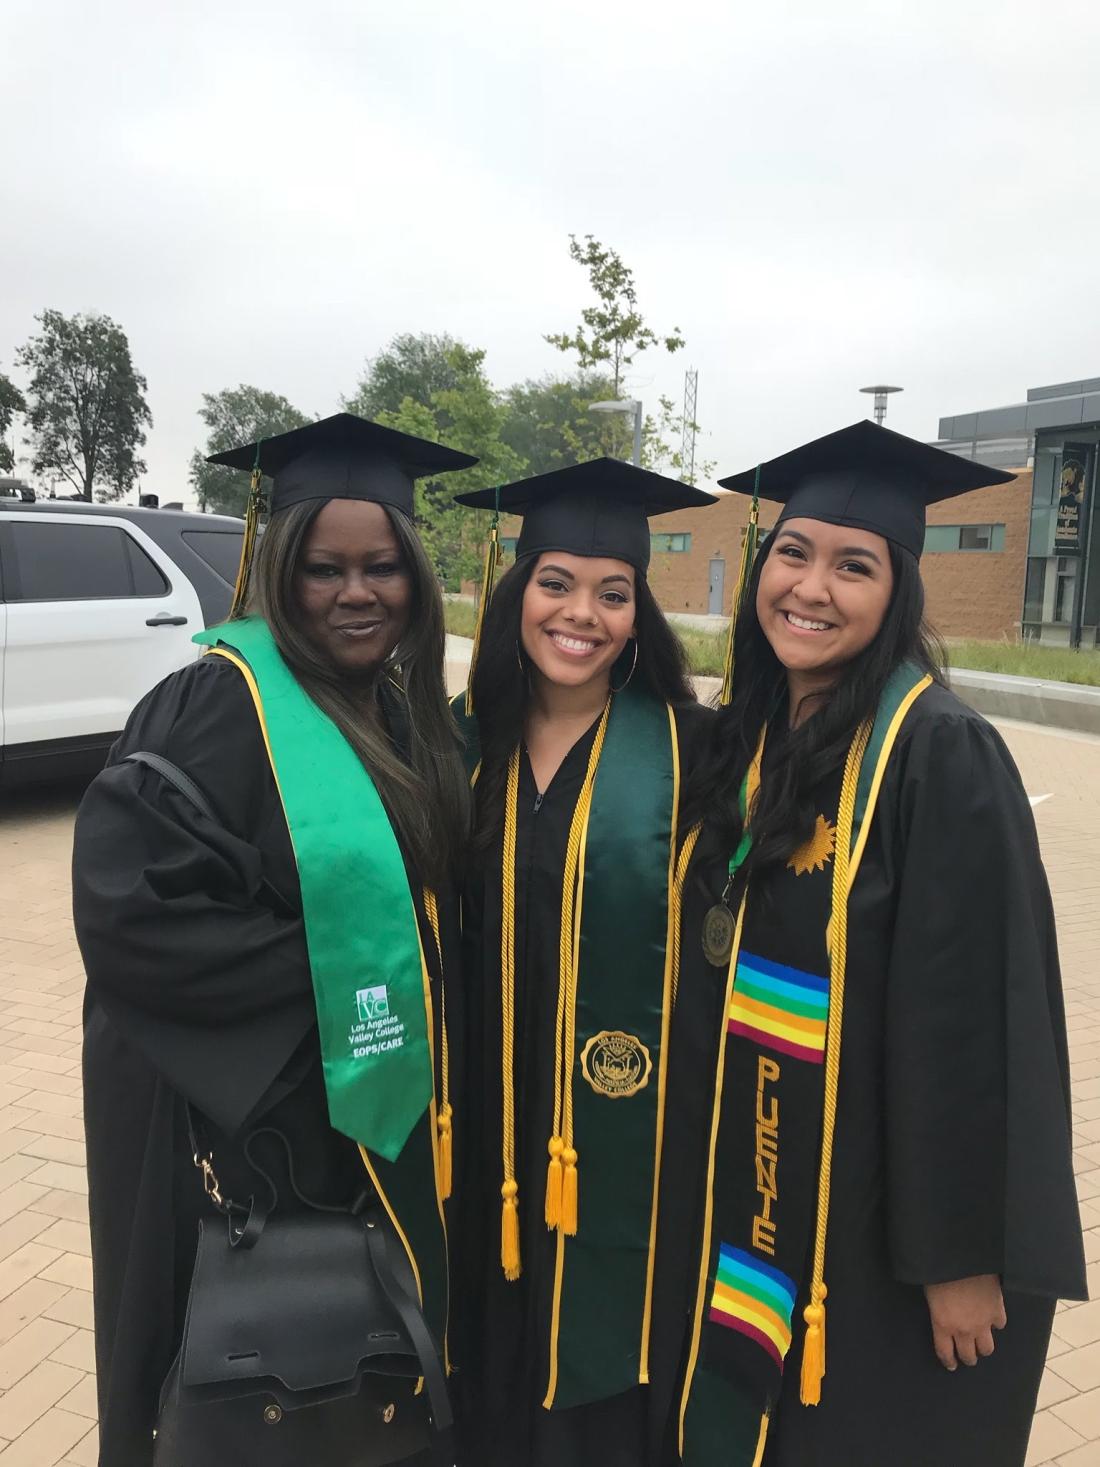 three women smiling in graduation caps and gowns